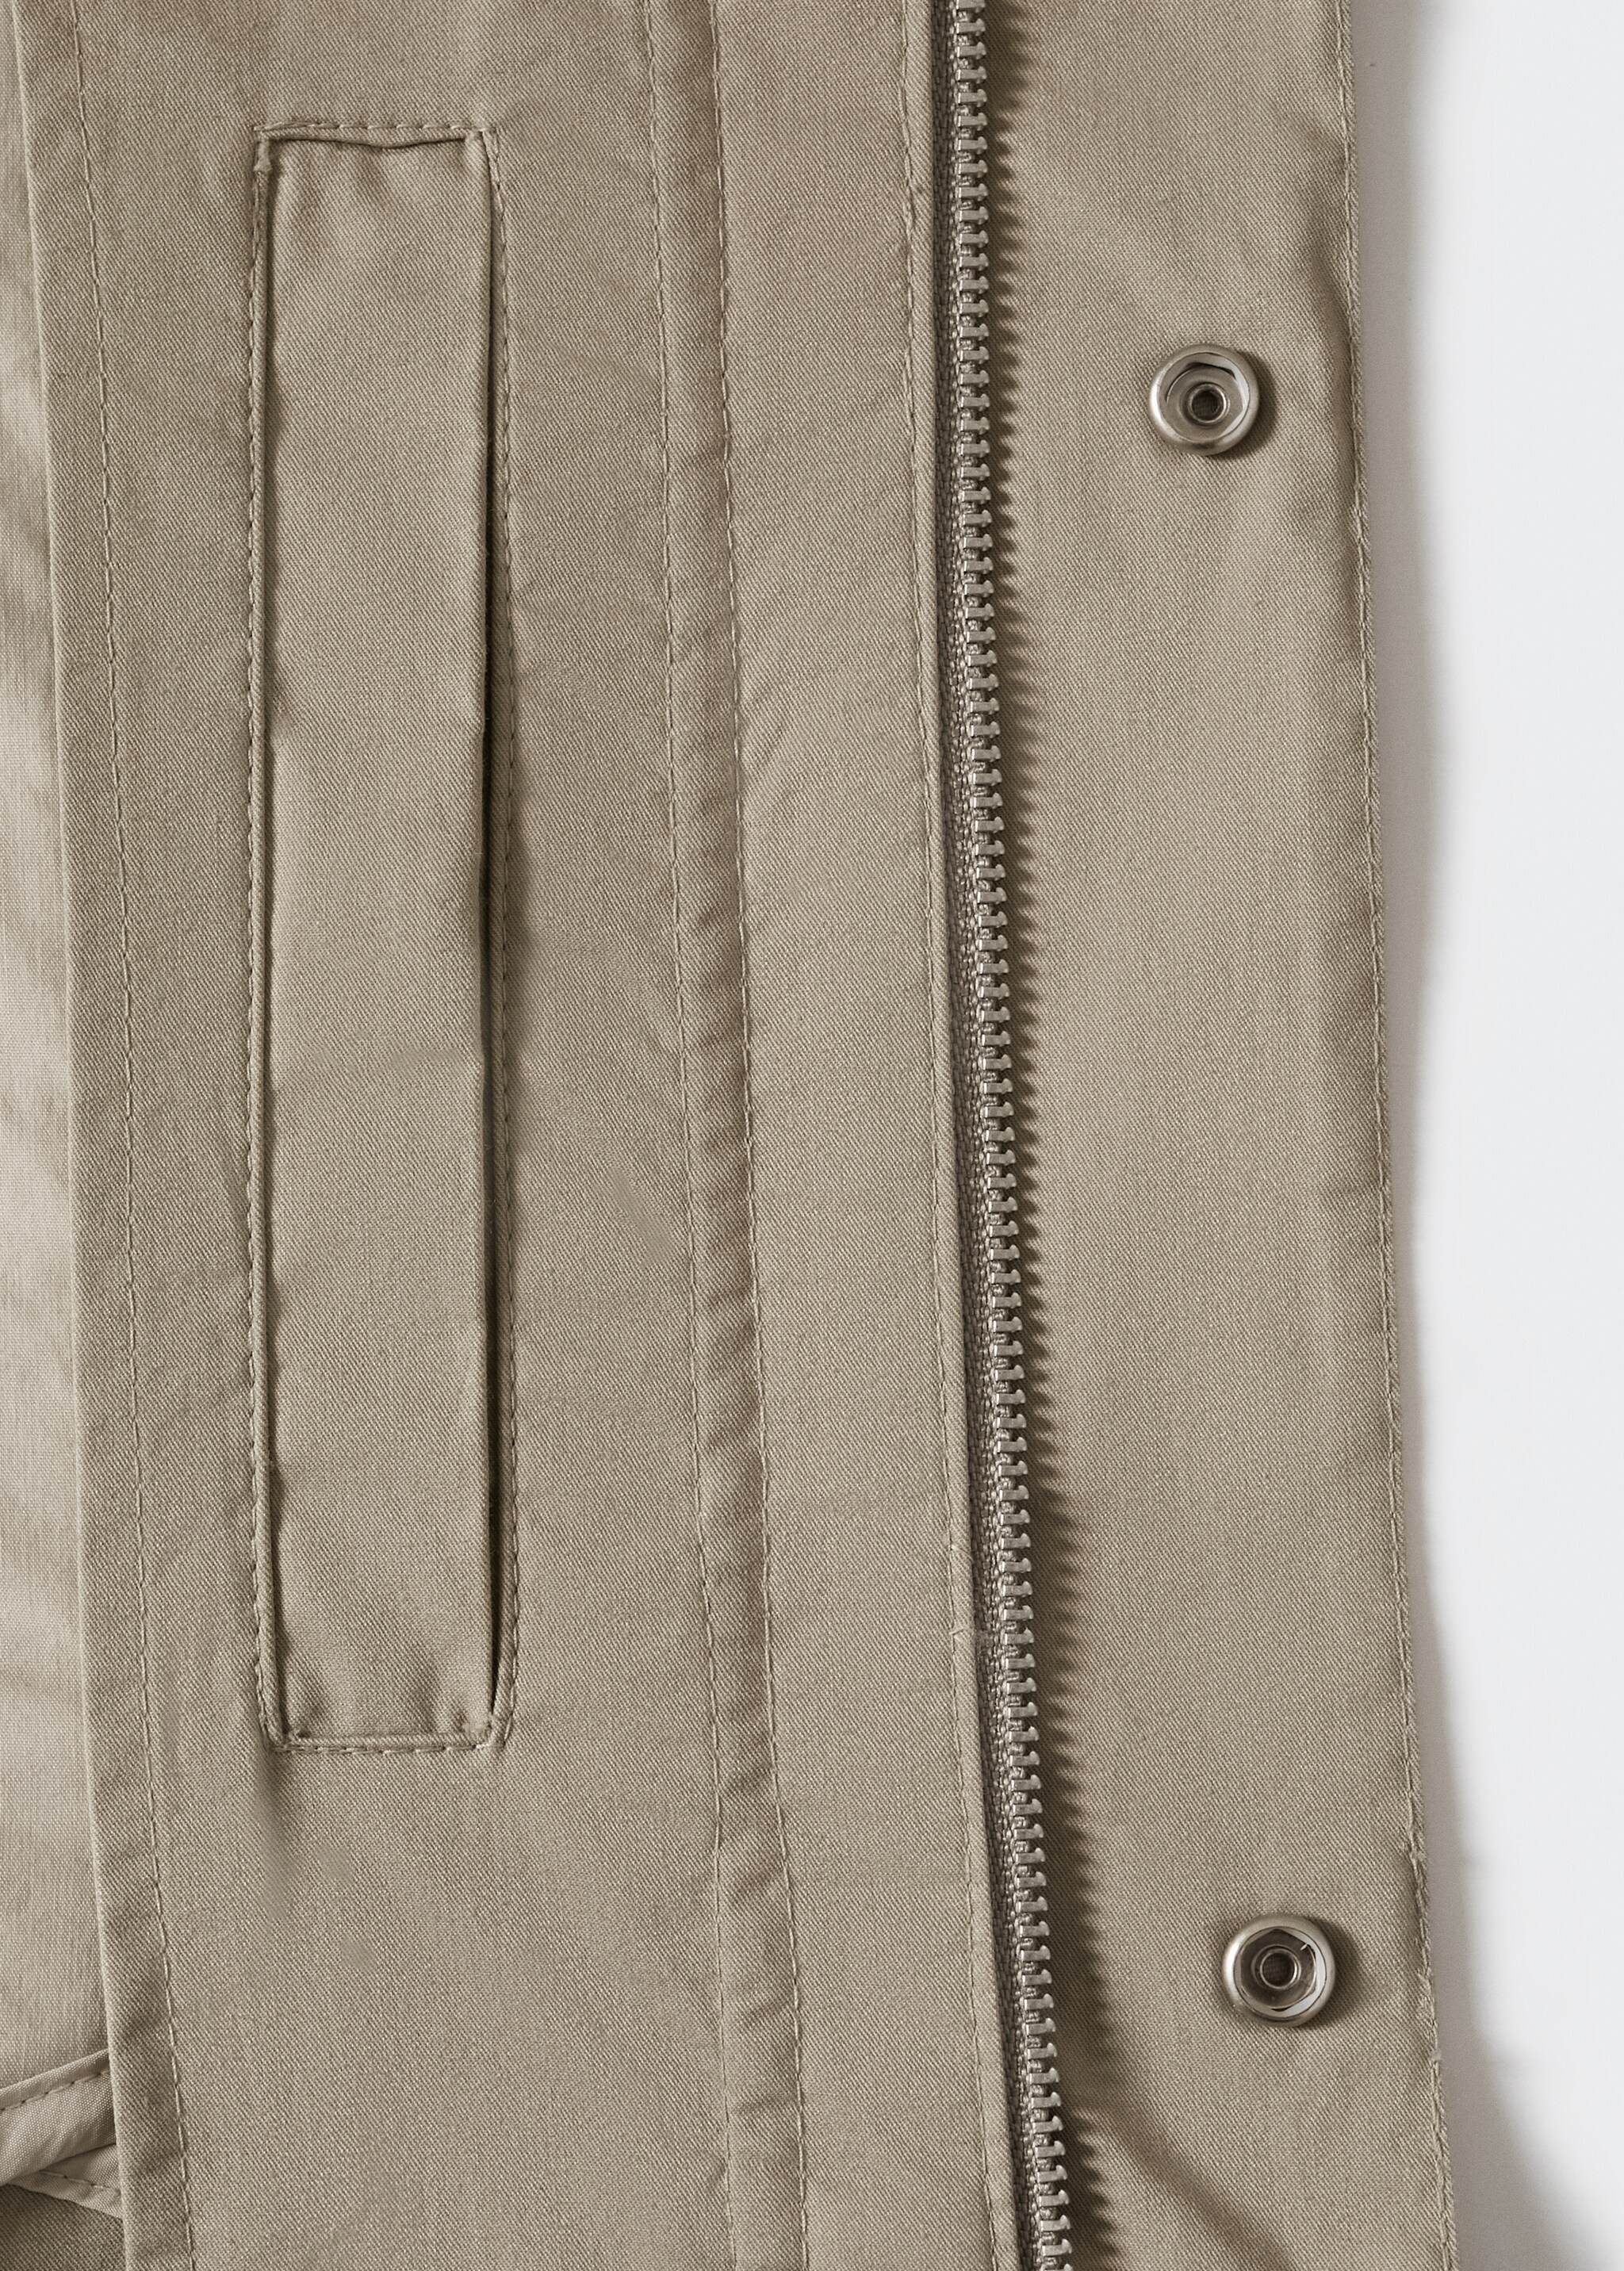 Cotton bomber jacket - Details of the article 7